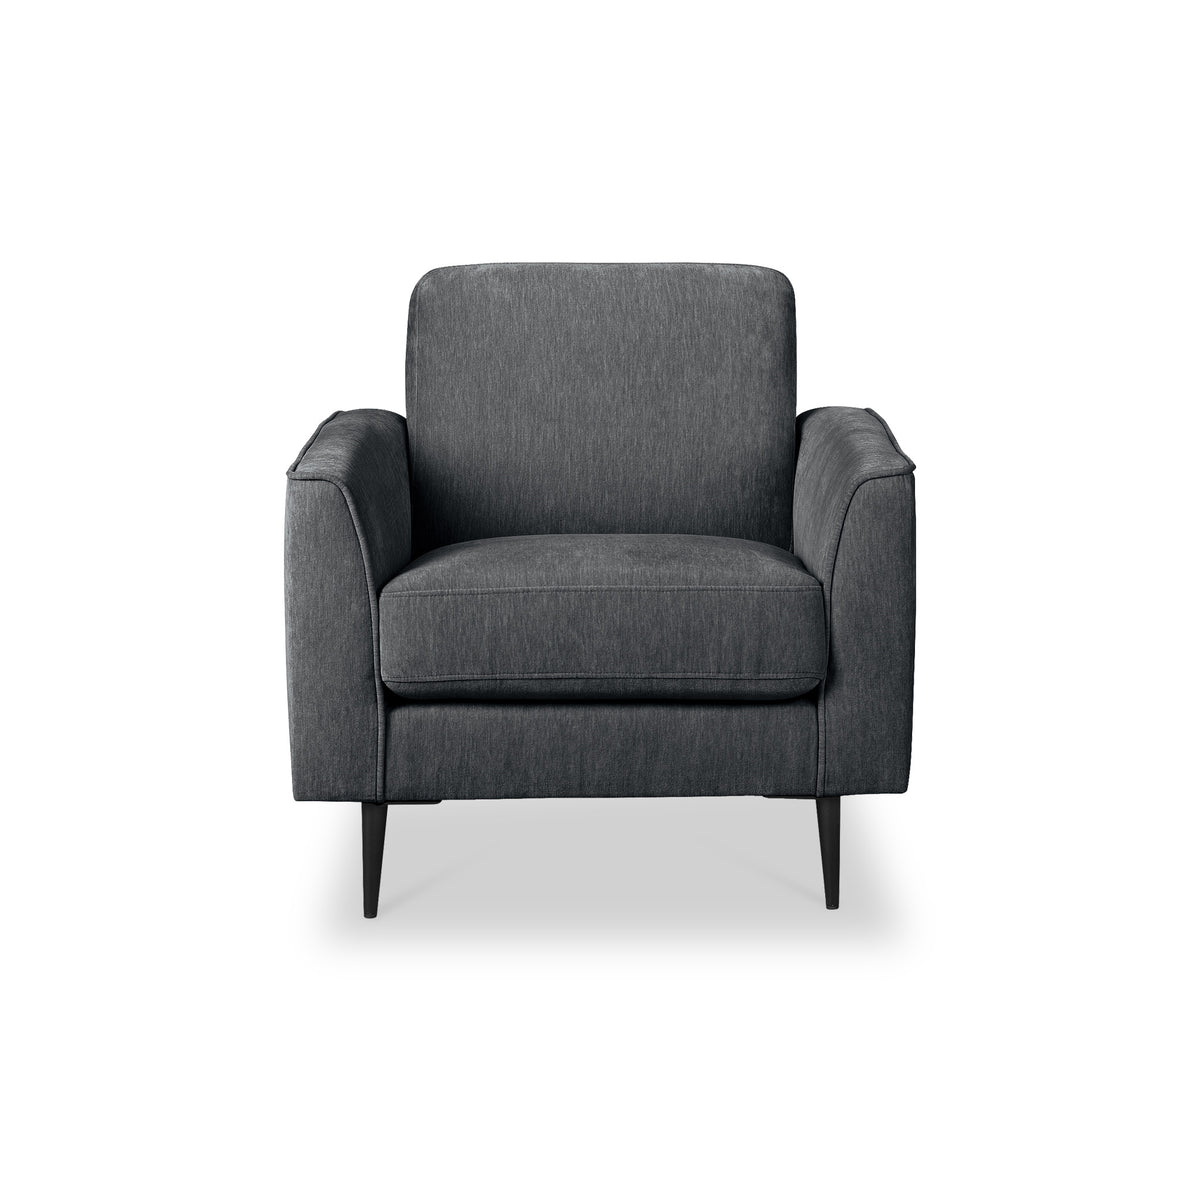 Esme Charcoal Grey Armchair from Roseland Furniture